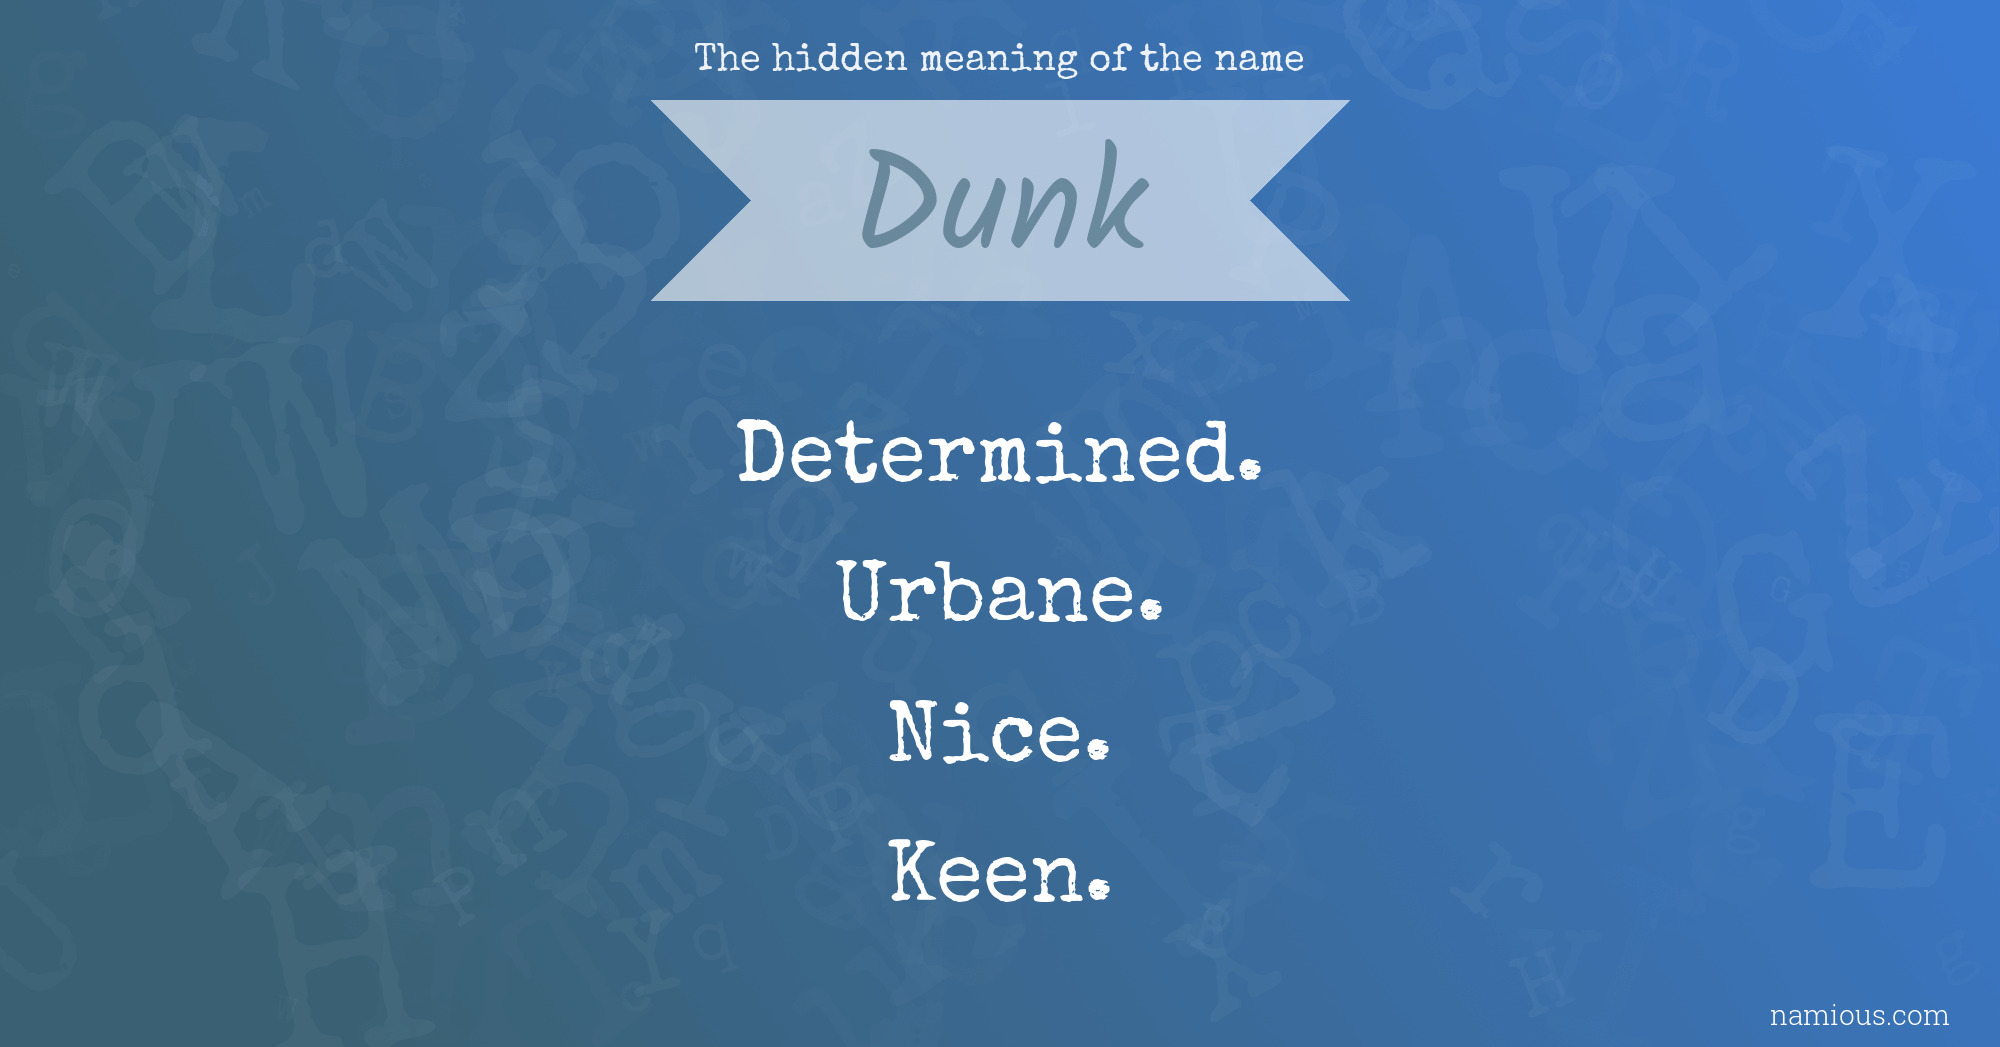 The hidden meaning of the name Dunk